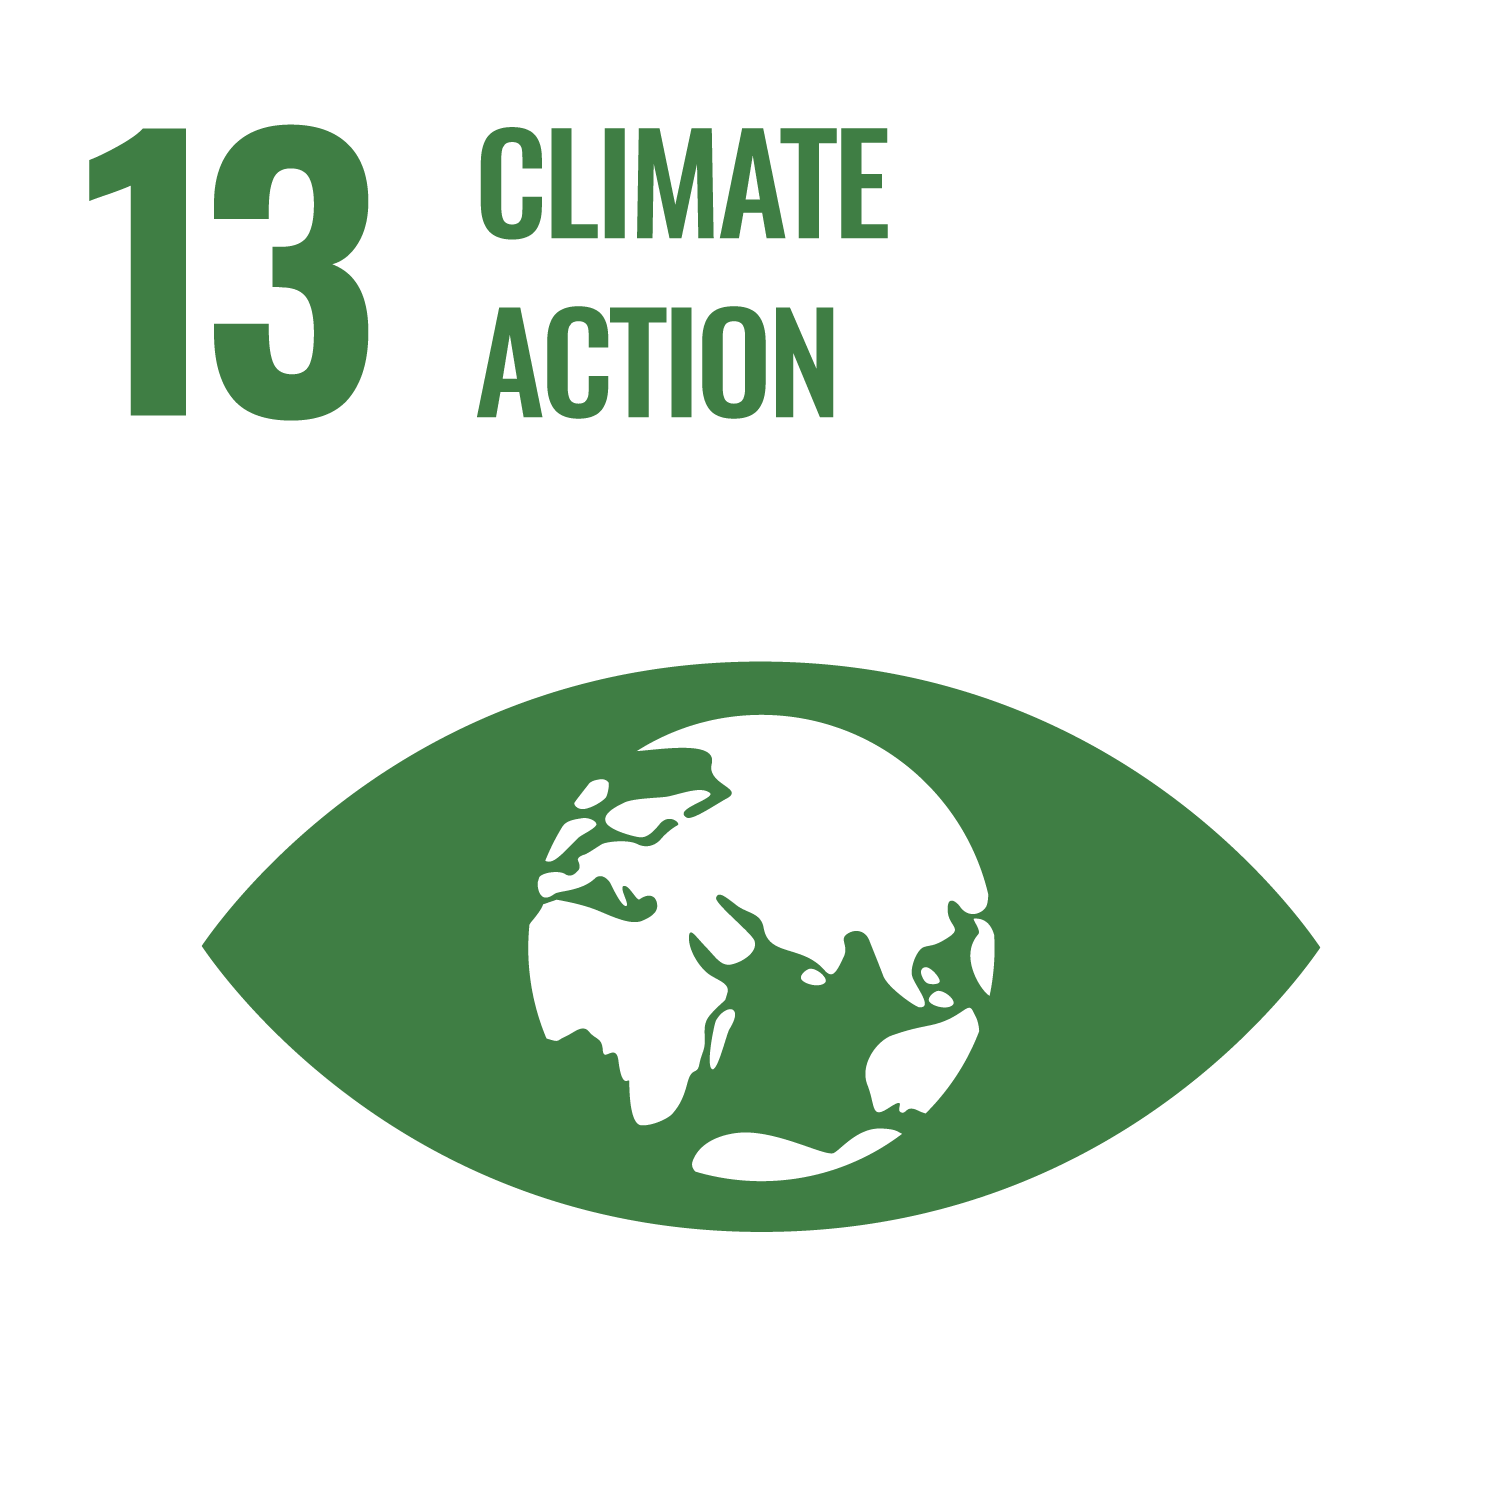 Goal 13 - Climate action